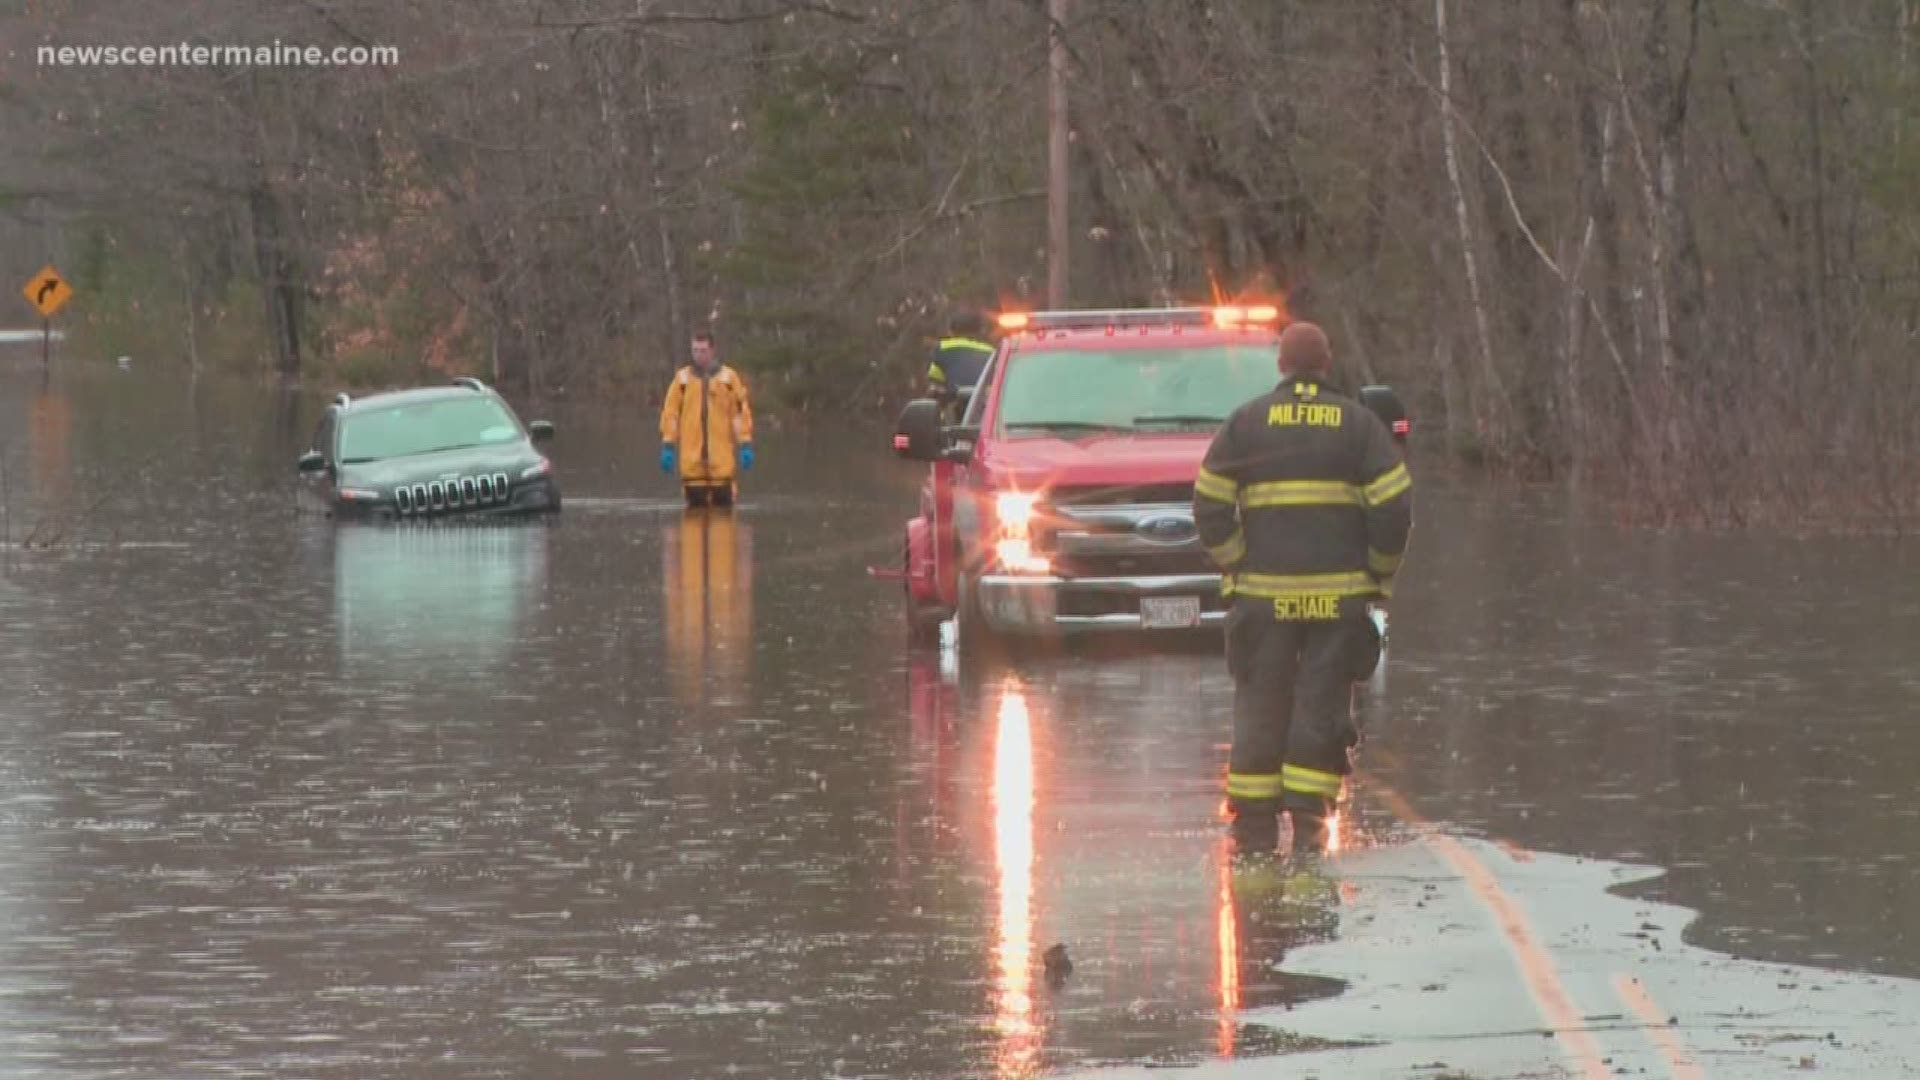 An SUV got stuck in the water after flooding in Milford on Wednesday.